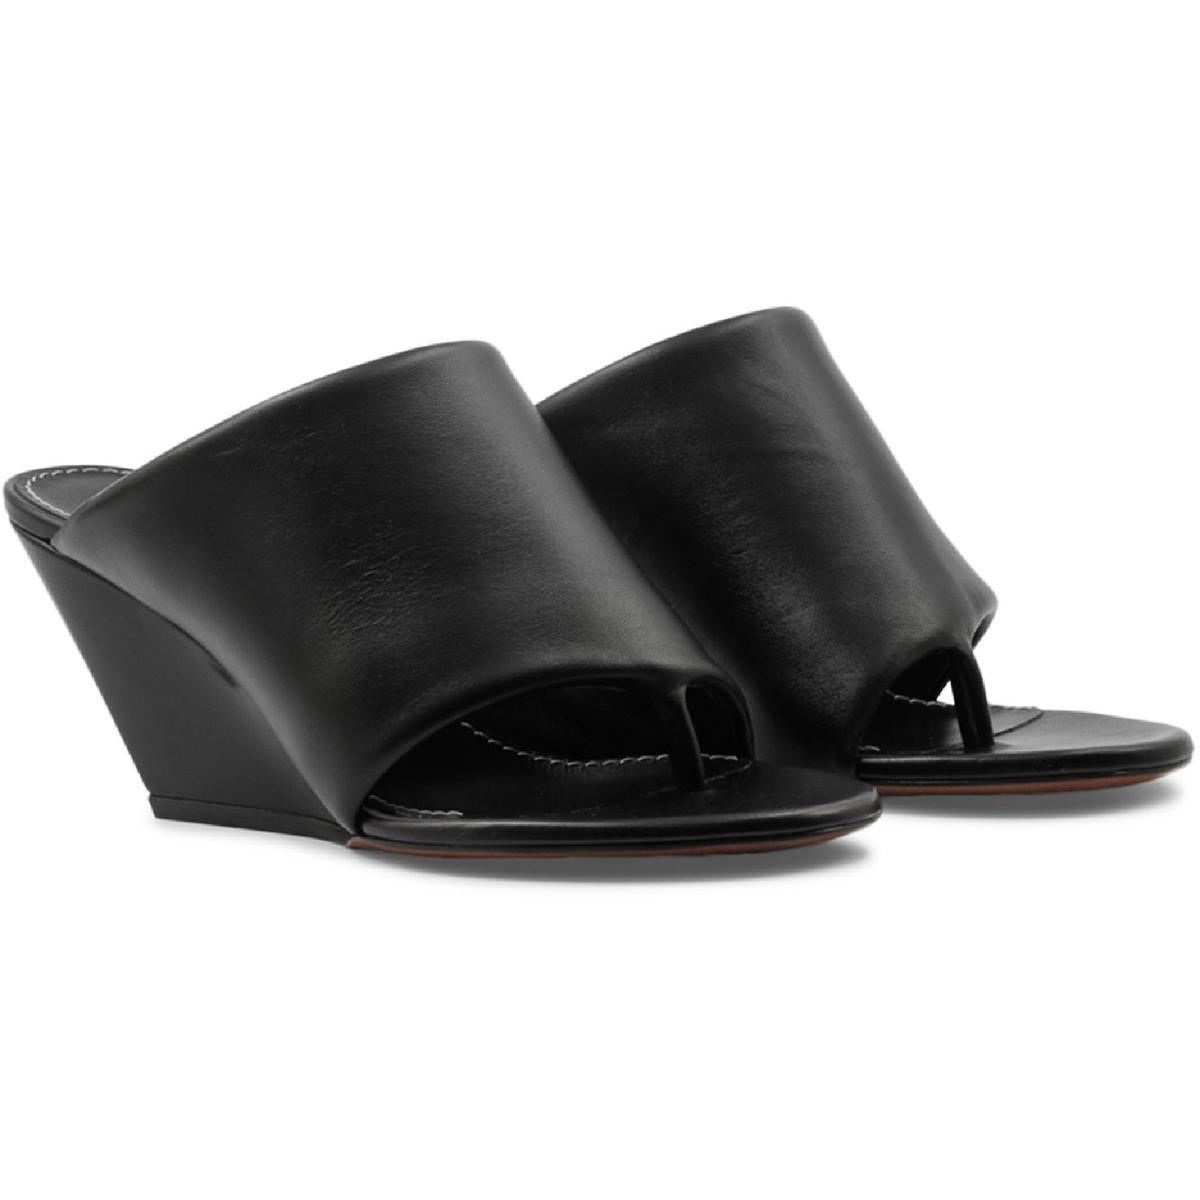 Pre-owned Proenza Schouler Womens Lamb Leather Wedge Heel Thong Sandals Shoes Bhfo 8939 In Black